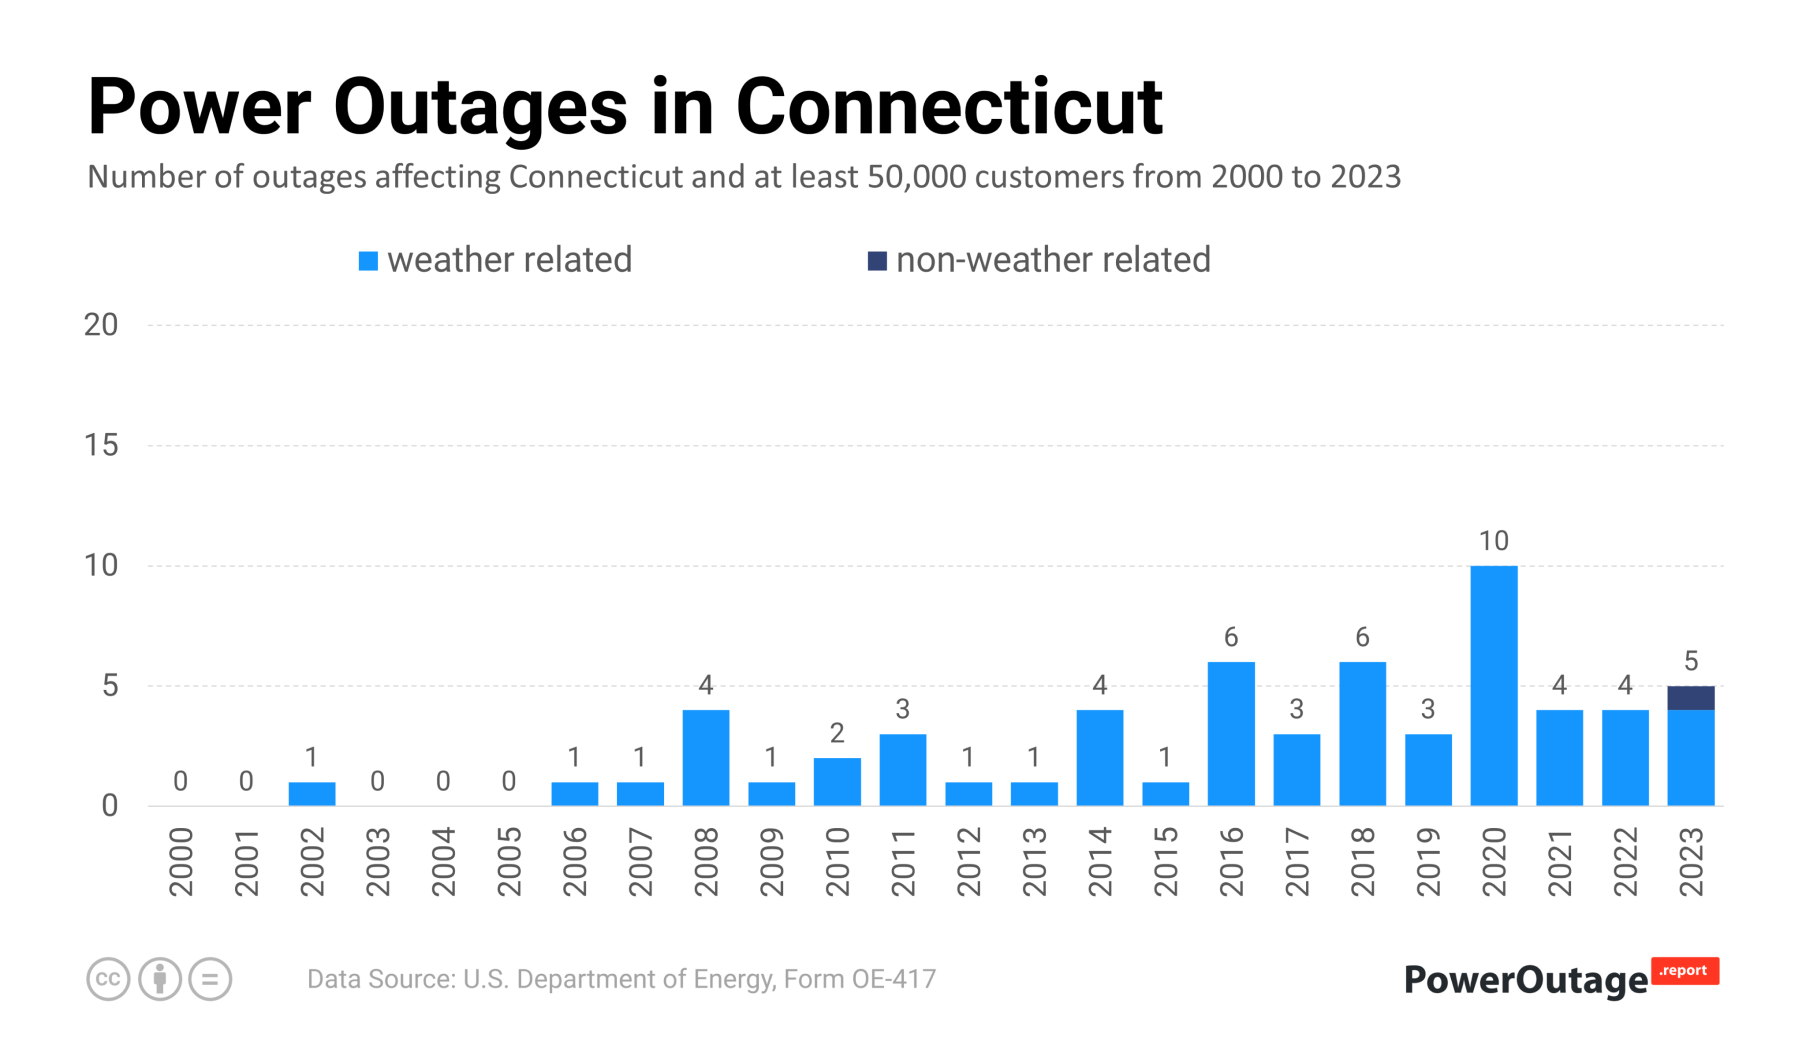 Connecticut Power Outage Statistics (2000 - 2022)